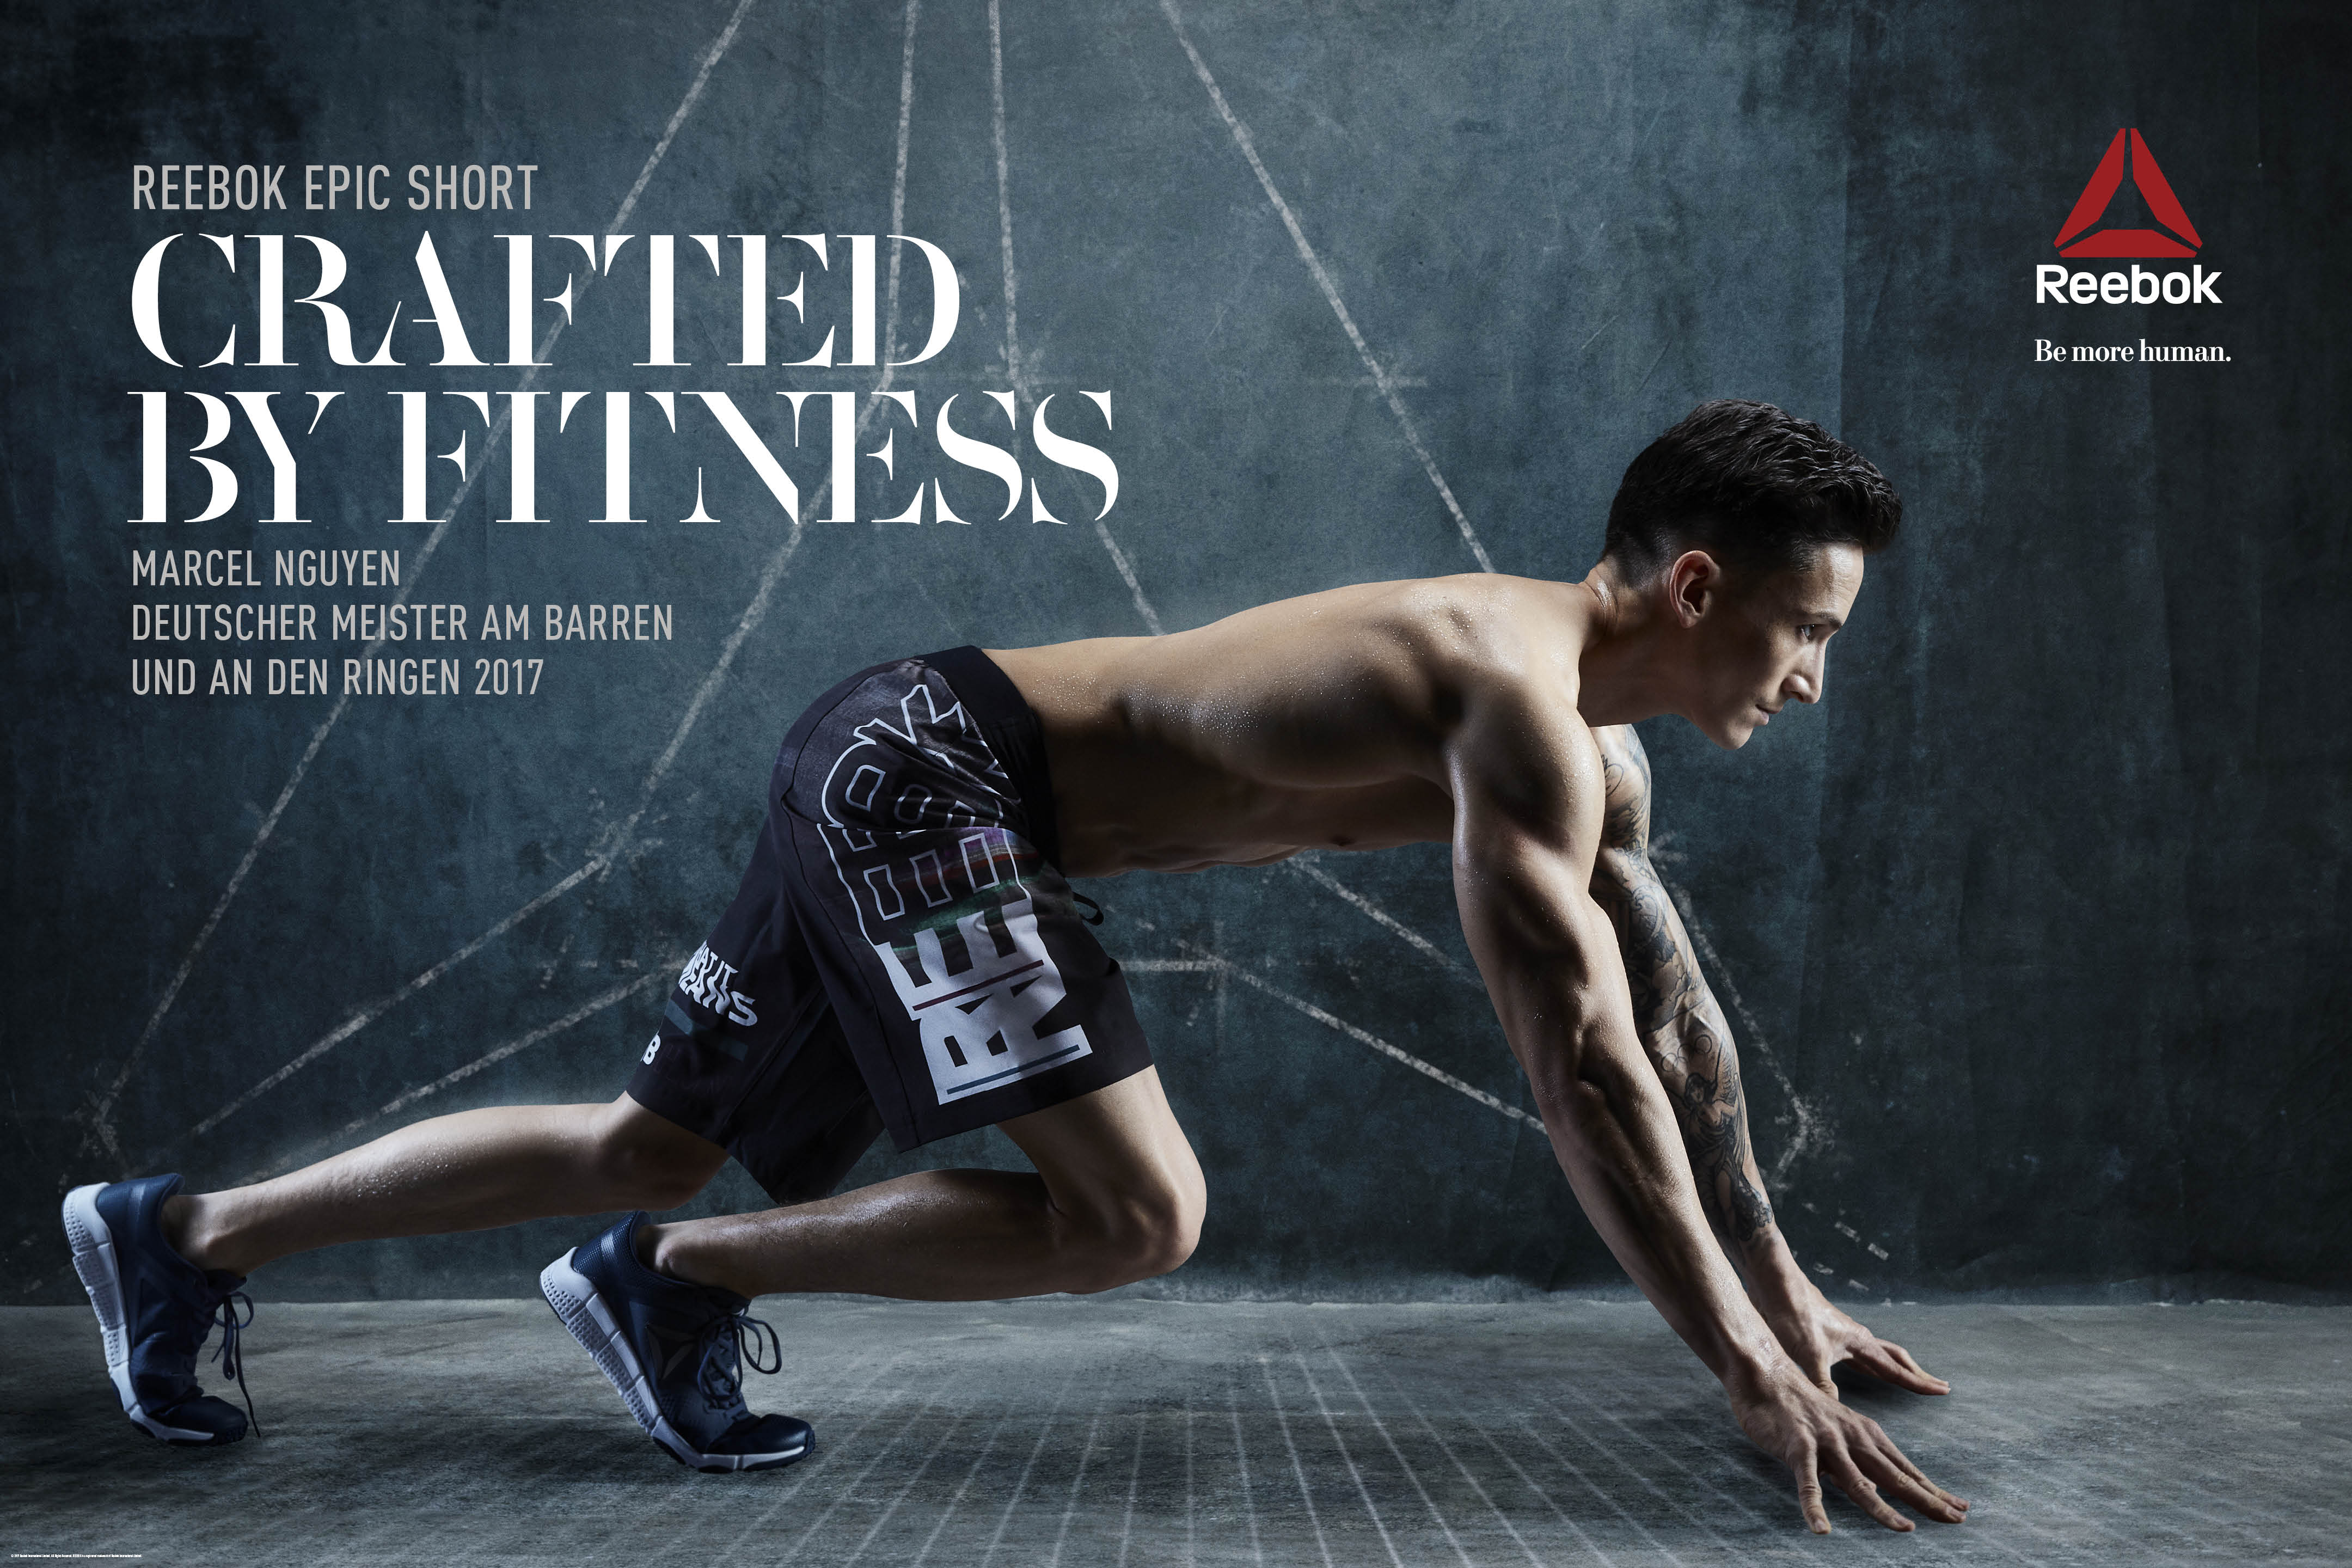 reebok crafted by fitness